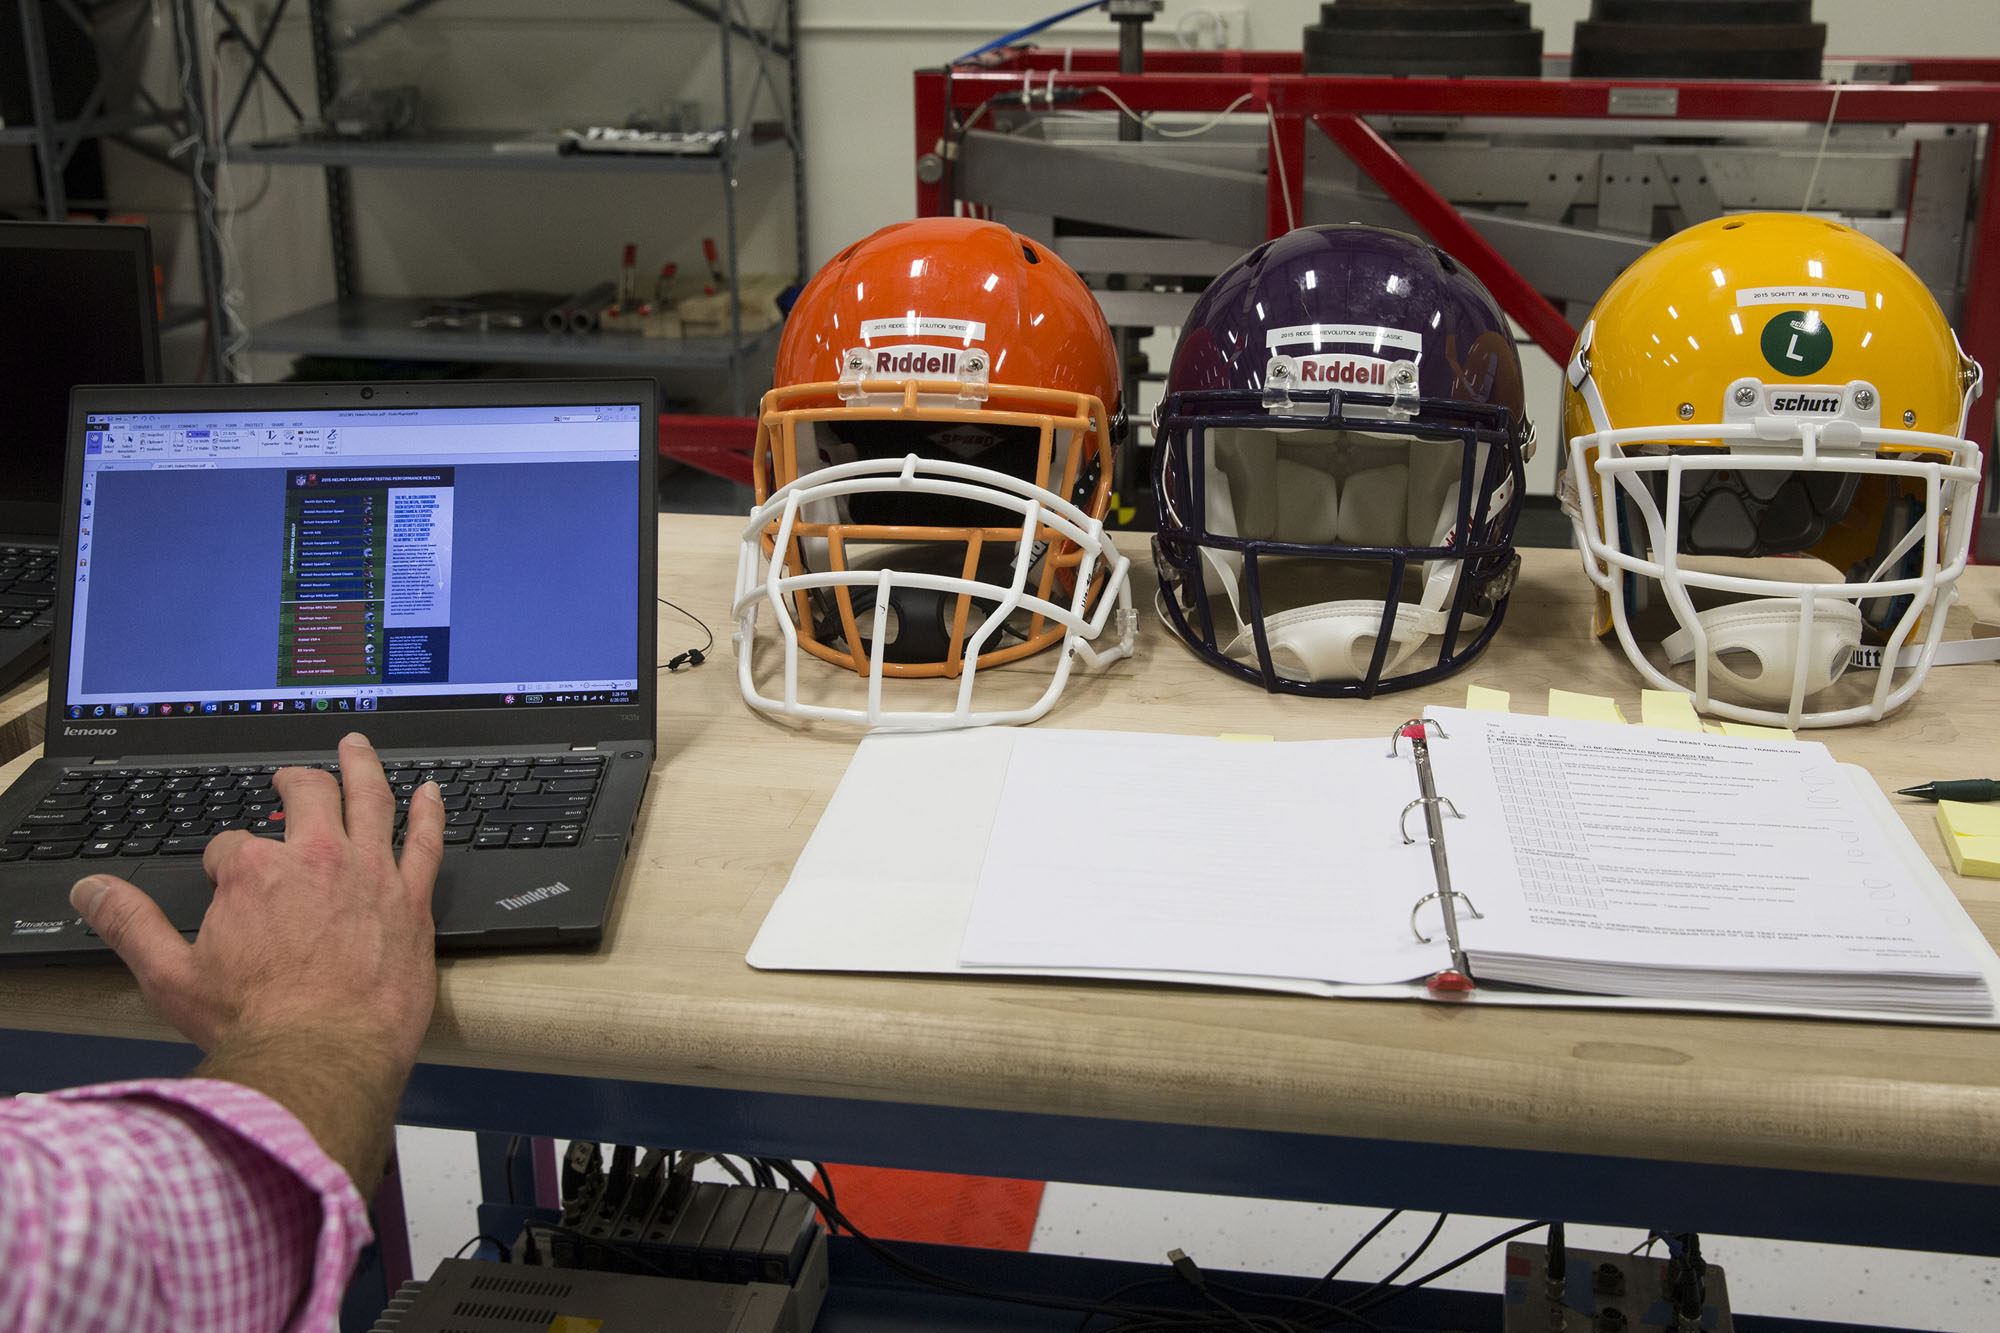 Football helmets are sitting on a table with a notebook and a person working on a laptop